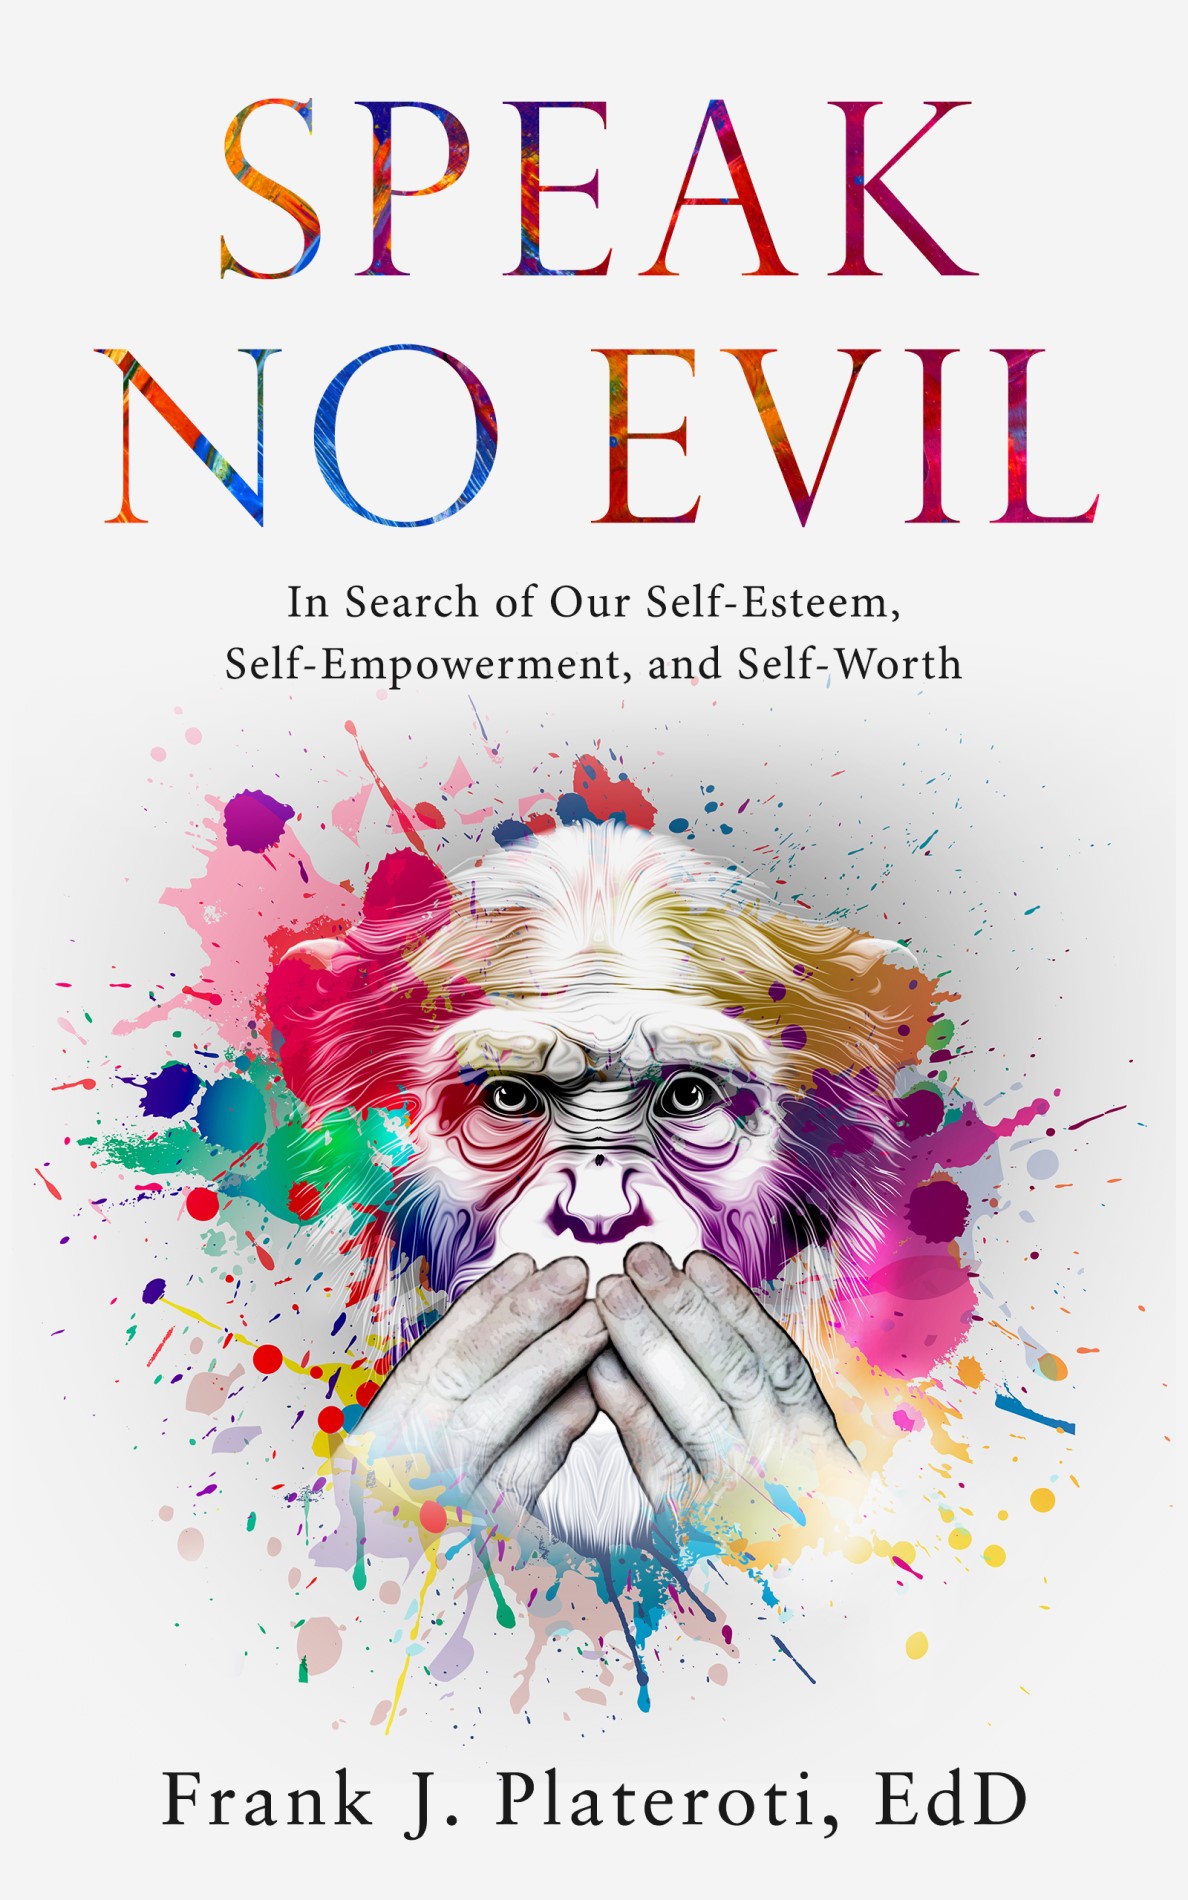 The front cover of Speak No Evil: In Search of Our Self-Esteem, Self-Empowerment, and Self-Worth by Frank Plateroti